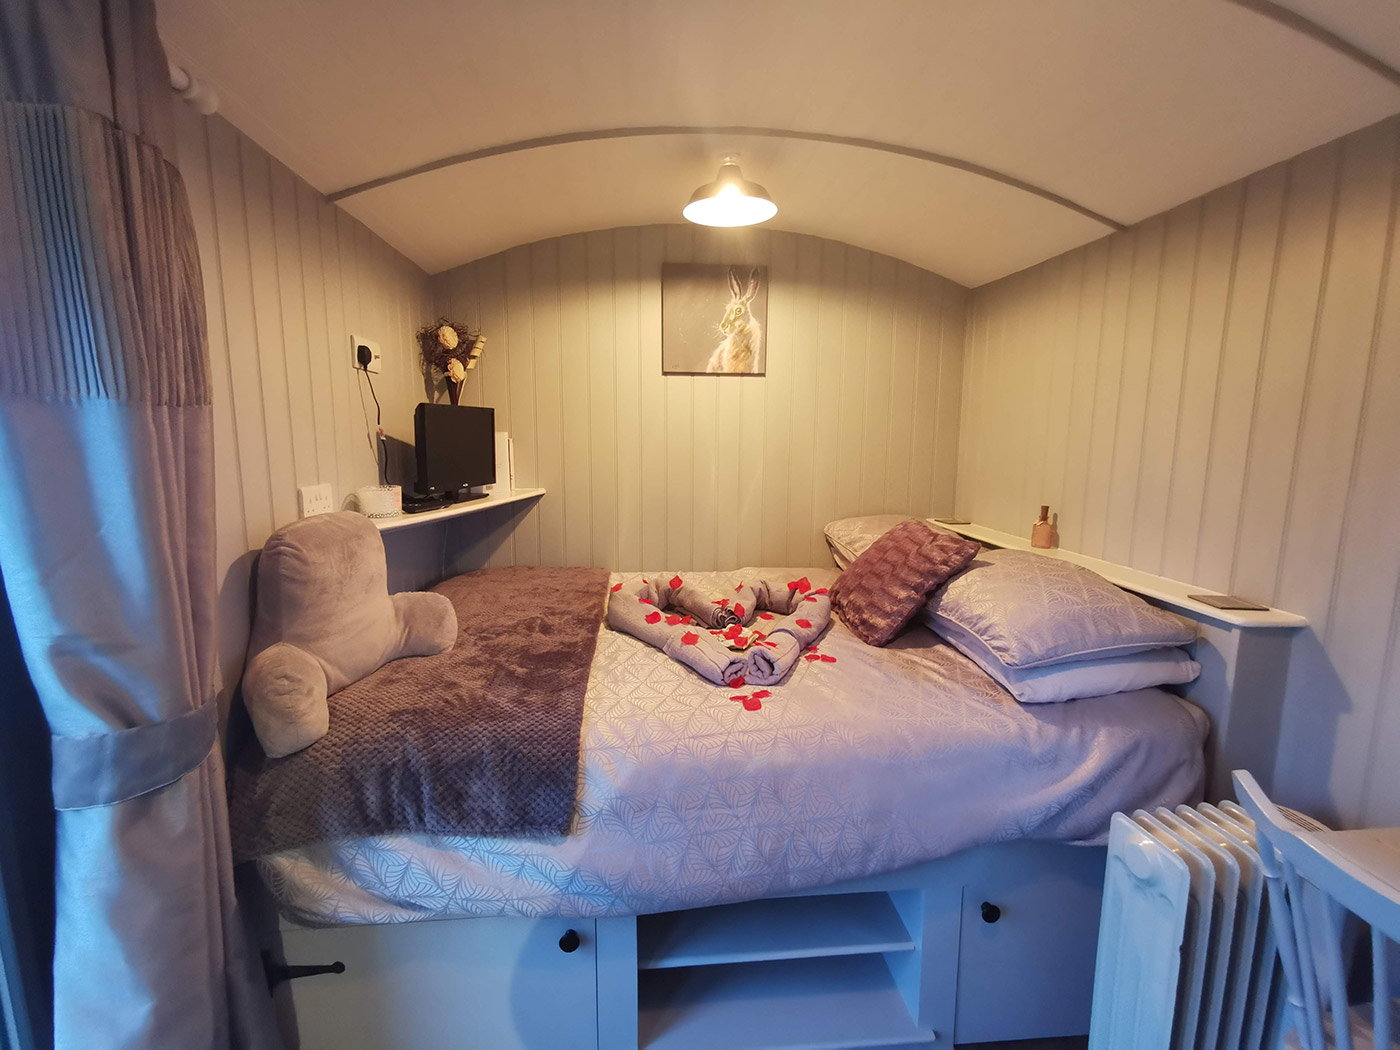 The super comfy bed with lots of built-in storage underneath